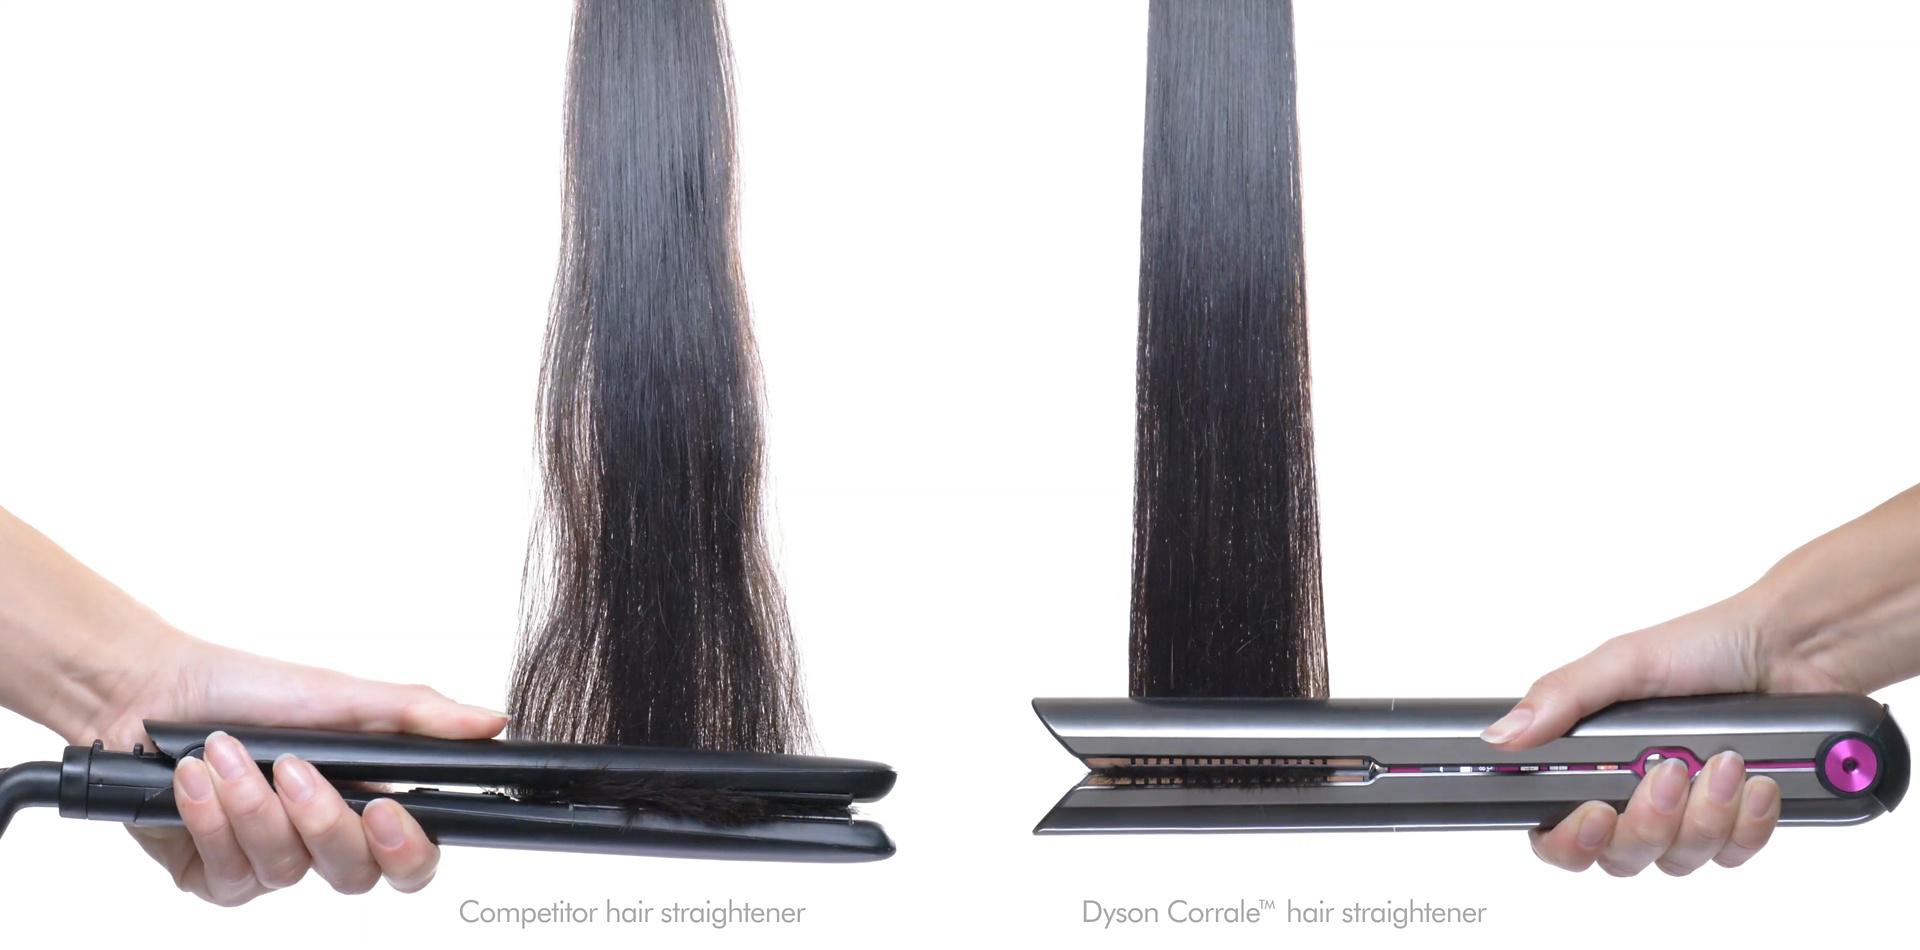 A conventional straightener and the Dyson Corrale each straighten a tress of hair